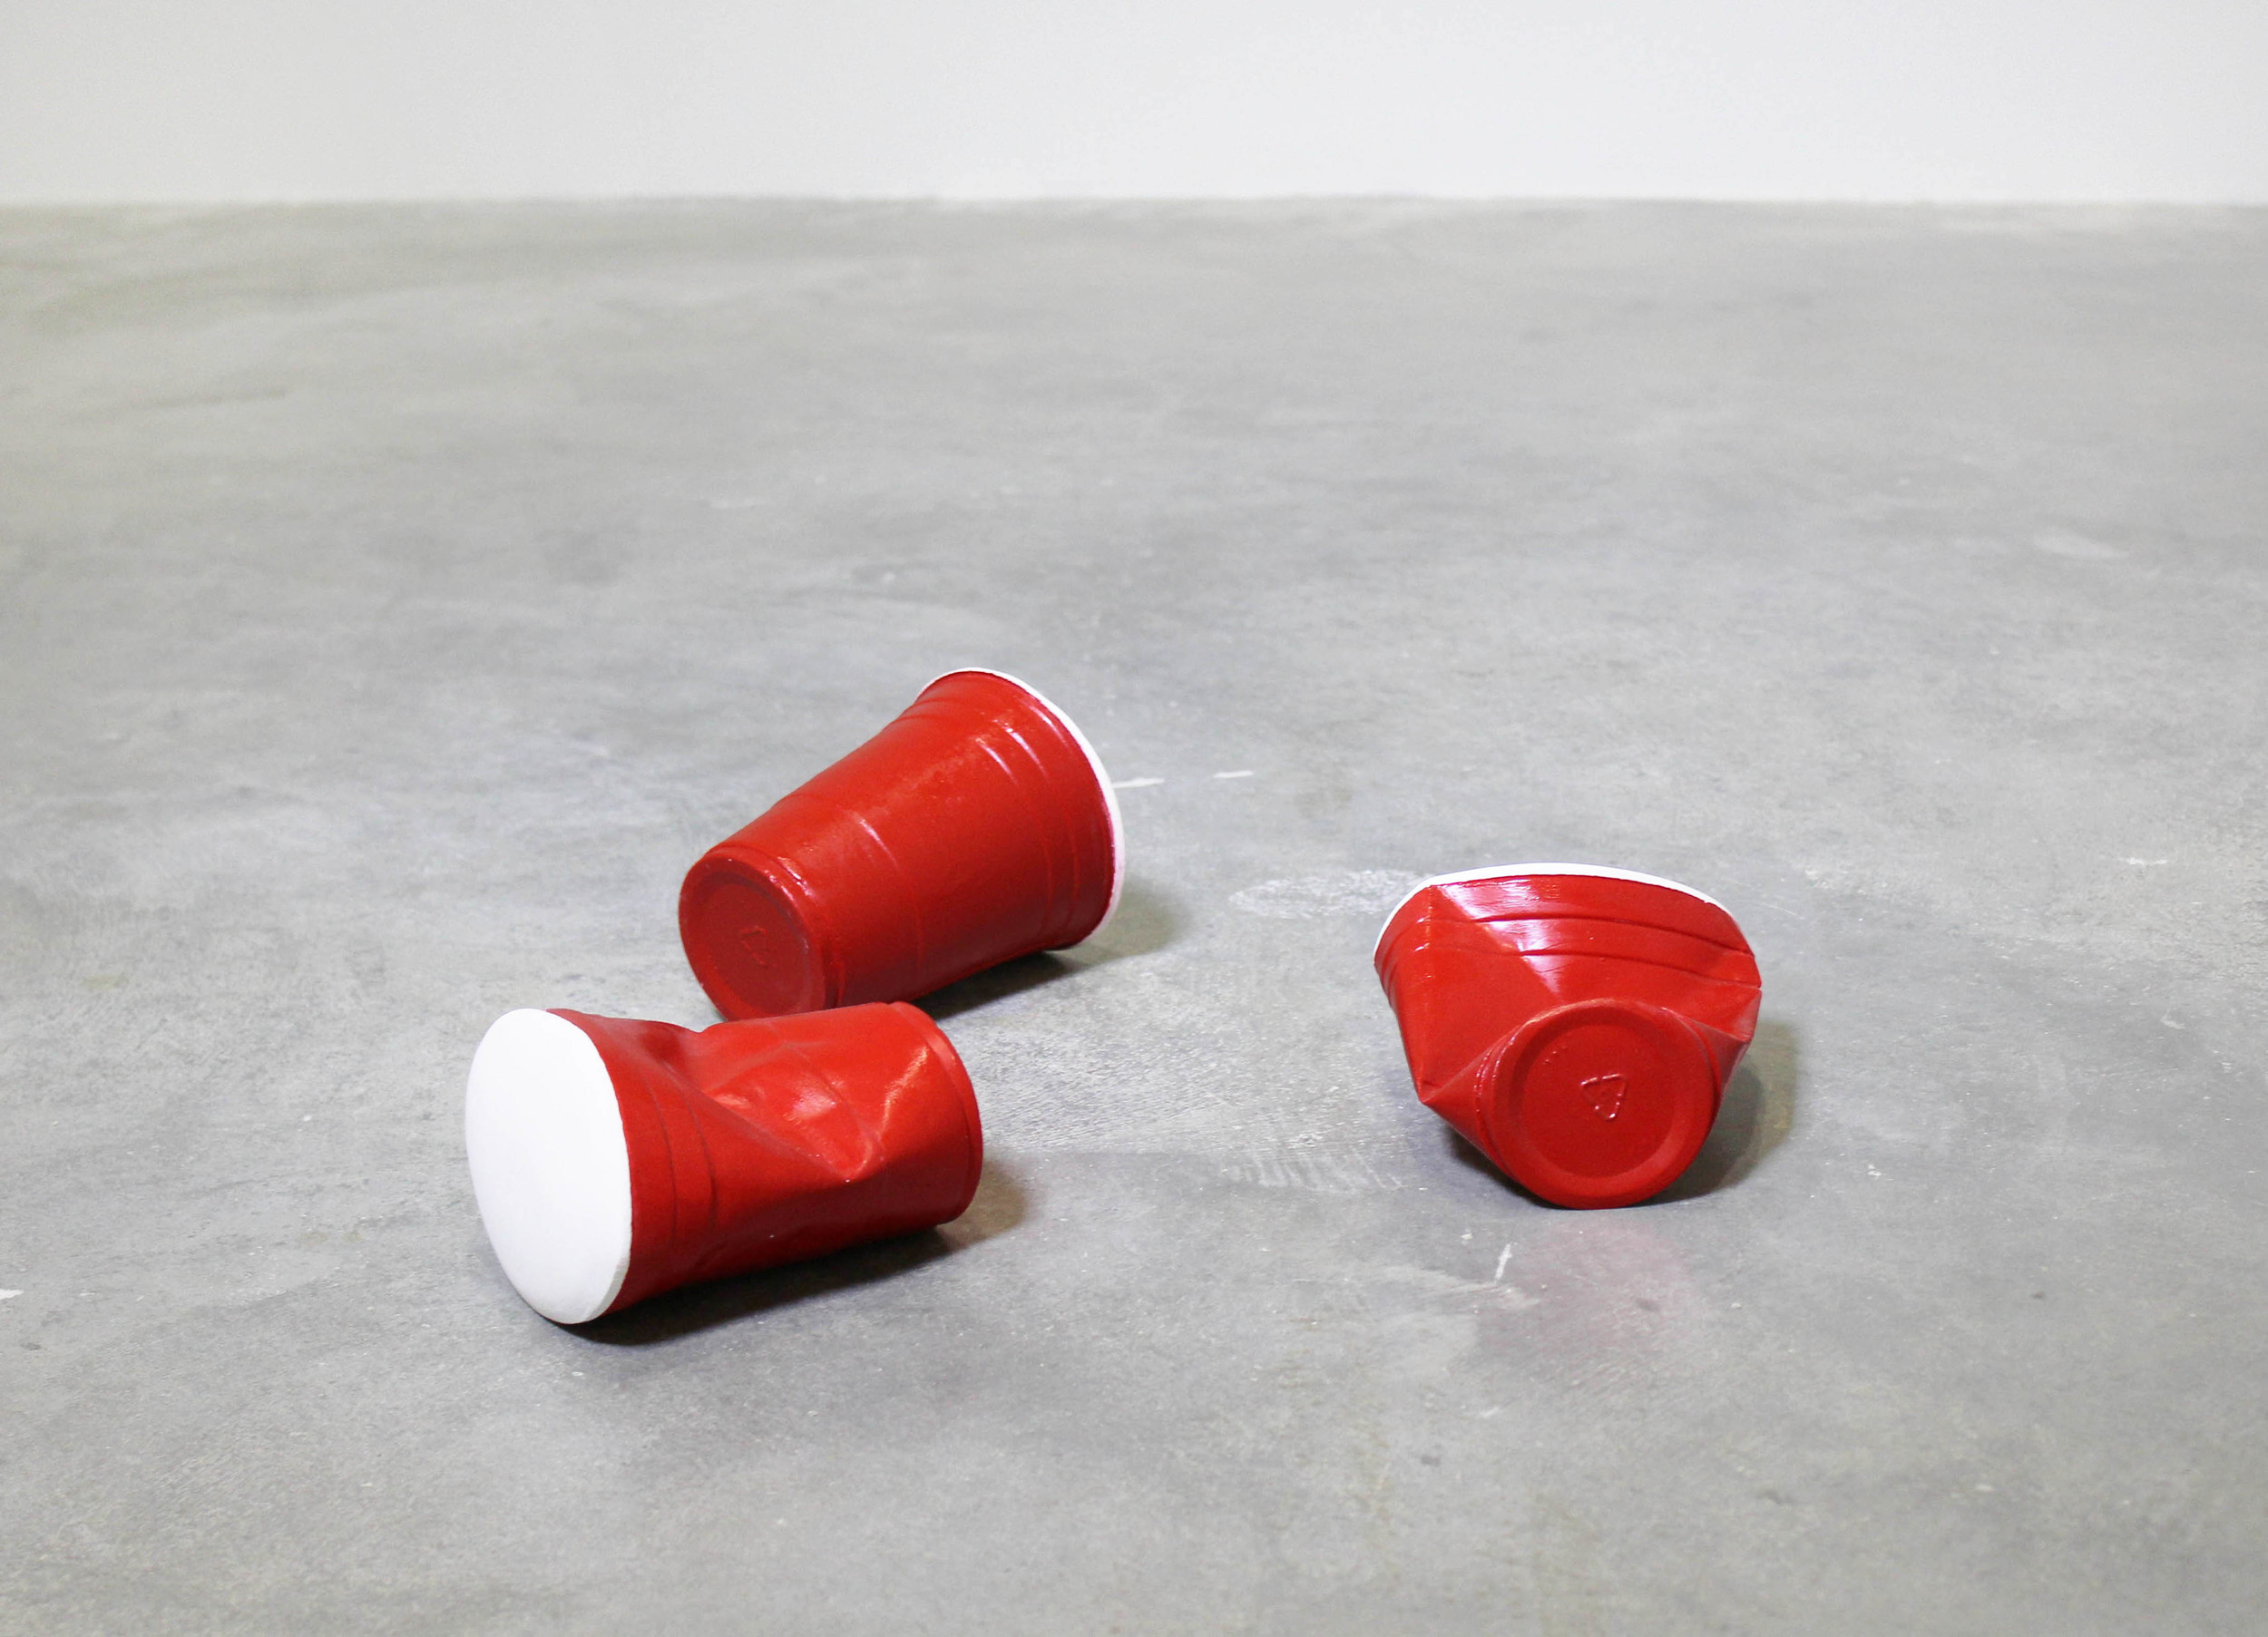 Untitled (Red Solo Cups)